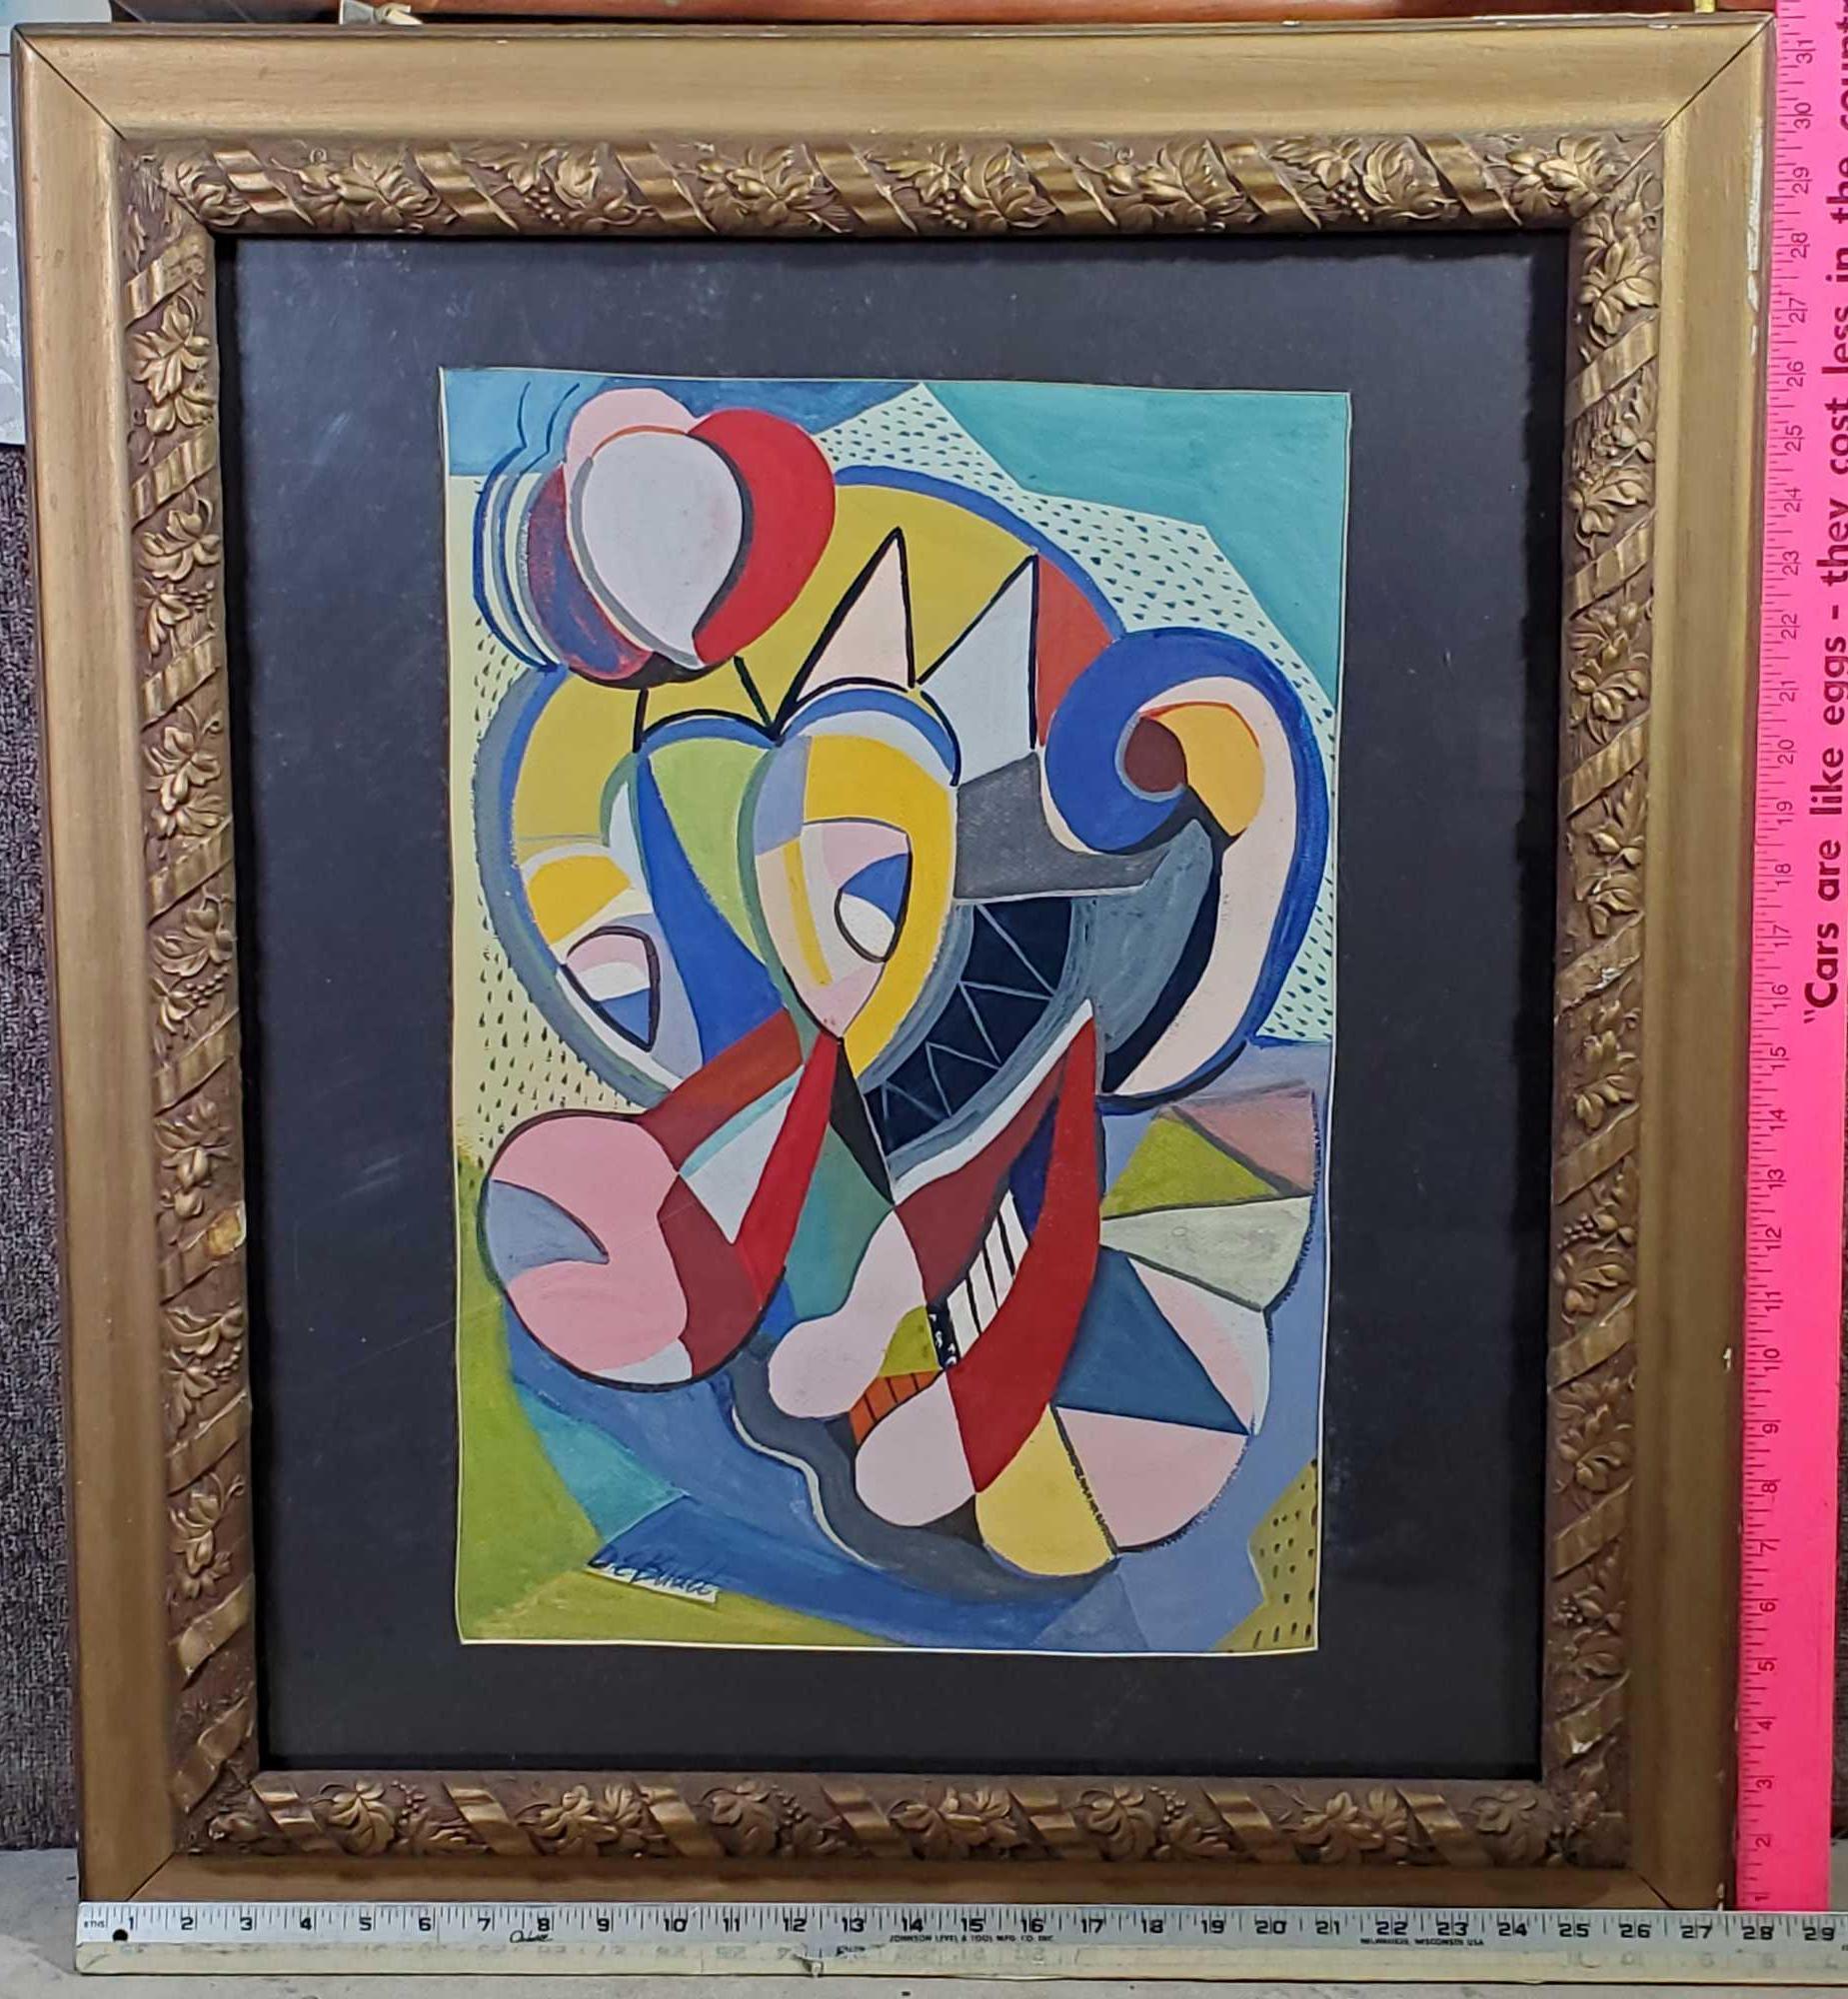 David Budd (1927 - 1991) New York, Florida / France Picasso Inspired Abstract Clown